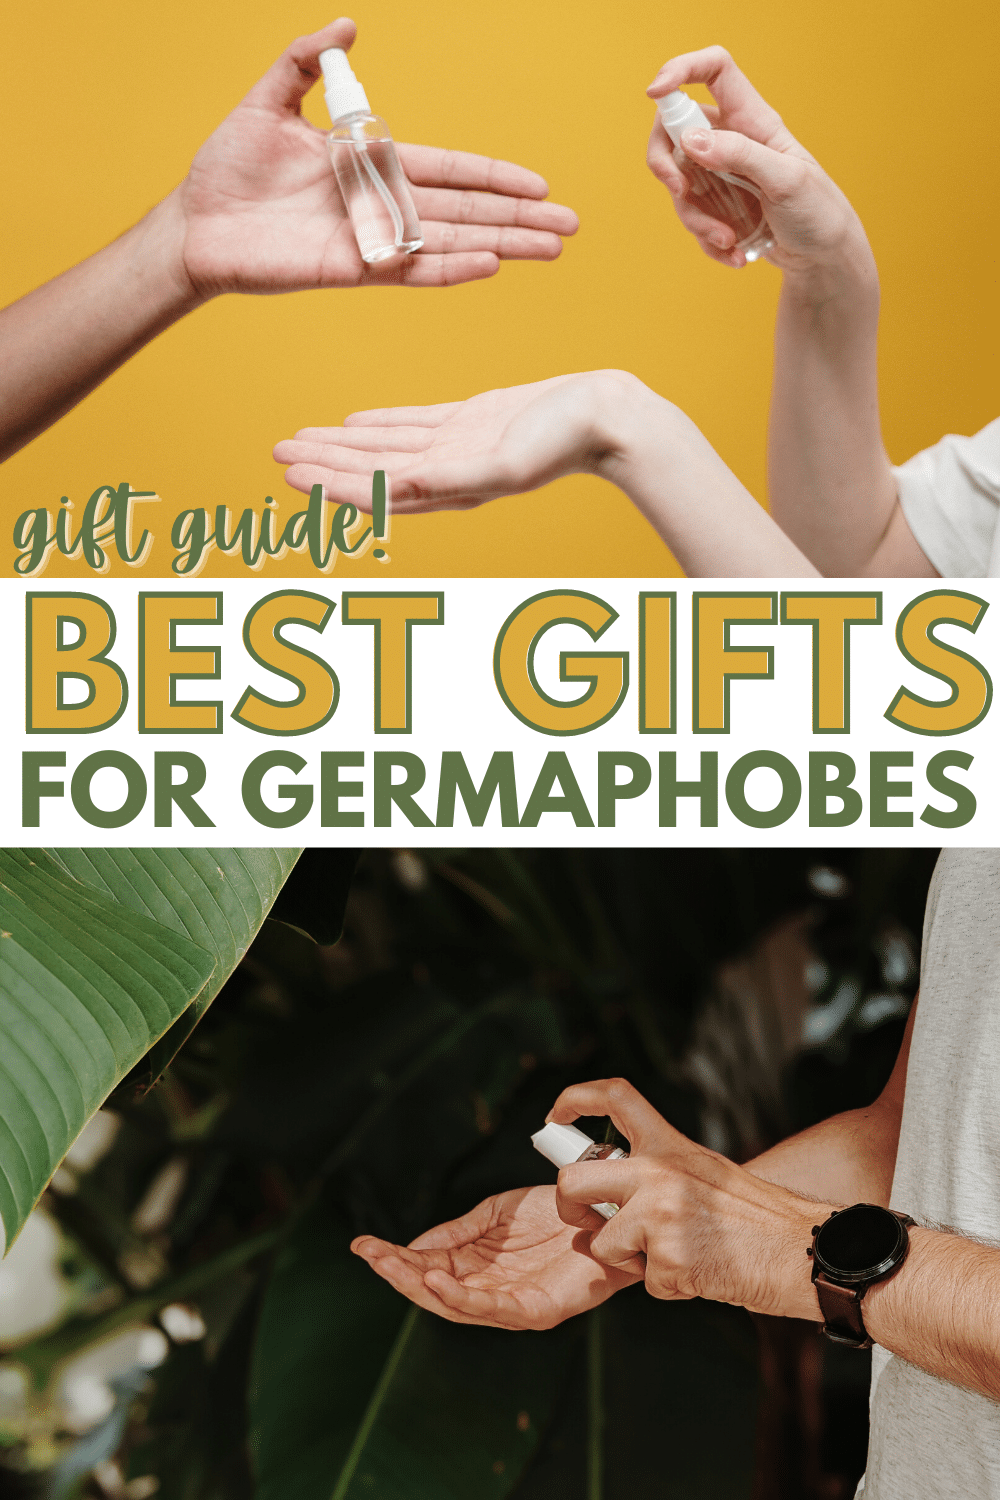 Do you have a friend who hates germs? This list of the best gifts for germaphobes has plenty of ideas he or she will love! #germaphobe #giftideas #giftguide via @wondermomwannab